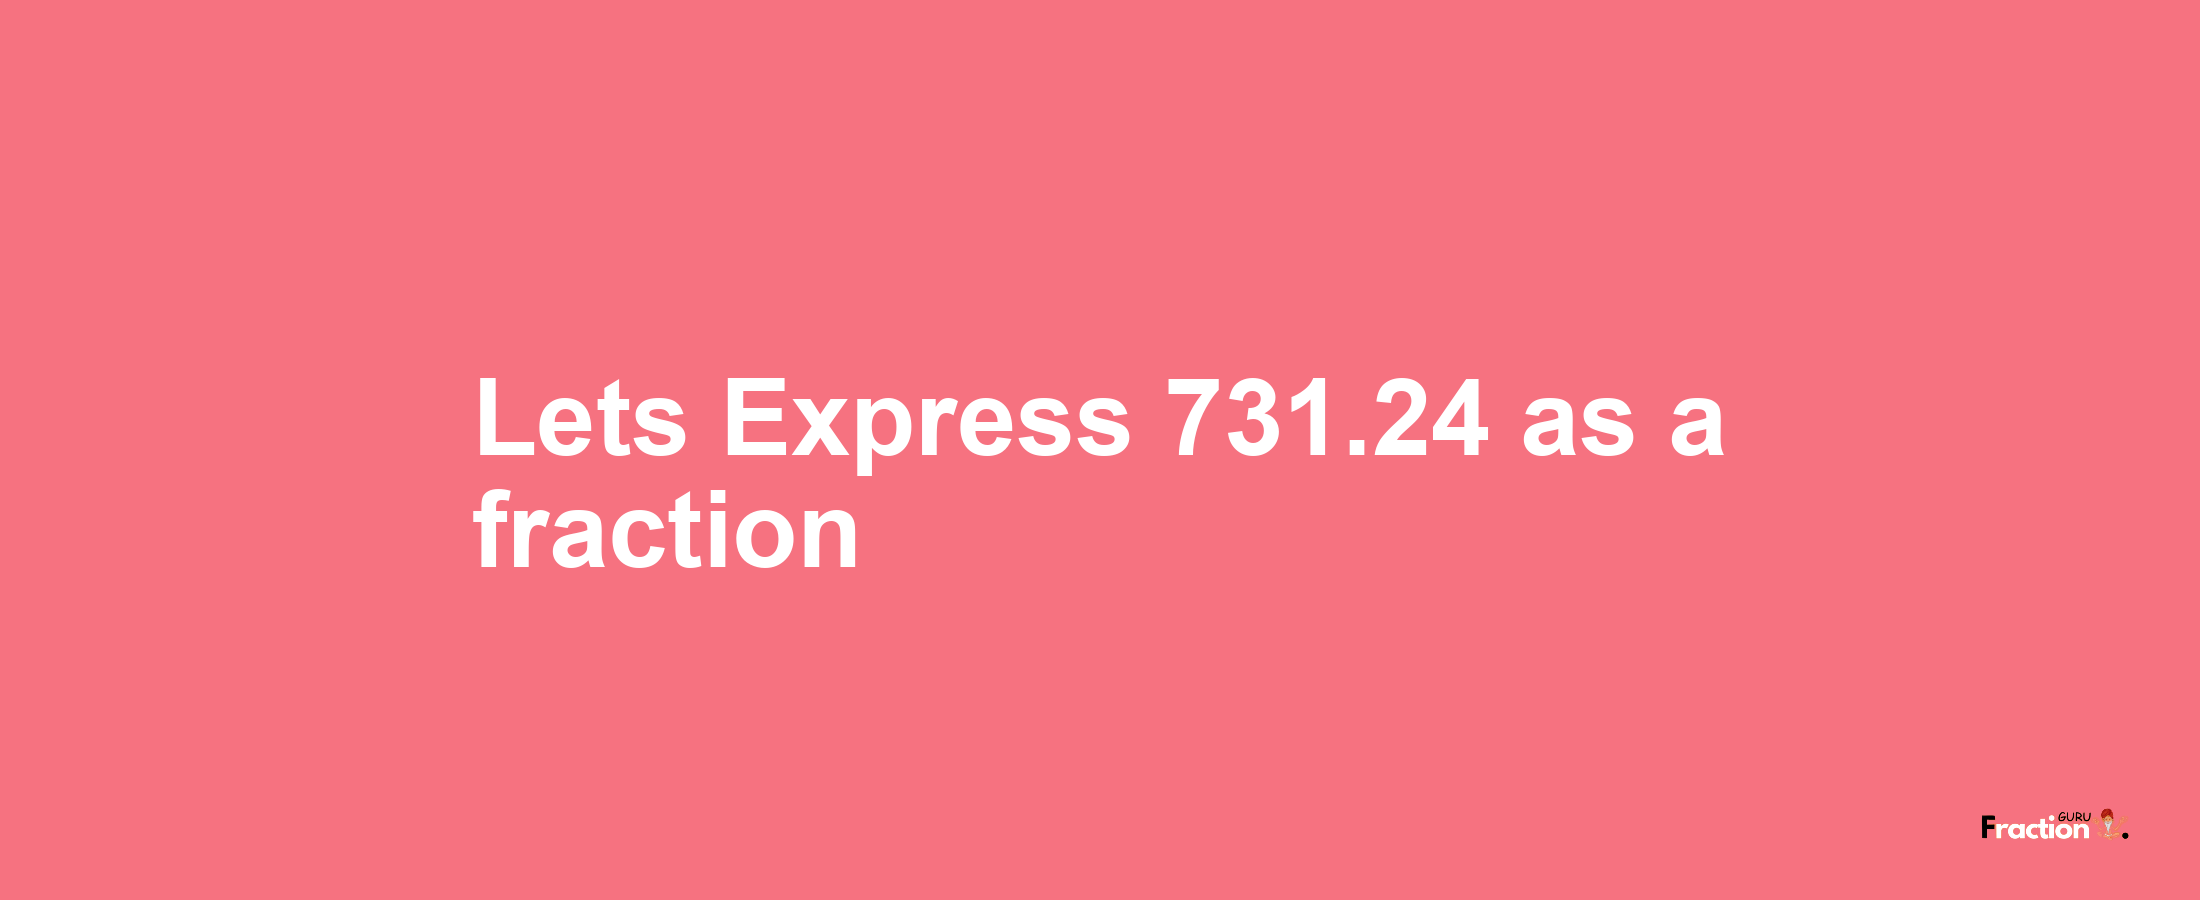 Lets Express 731.24 as afraction